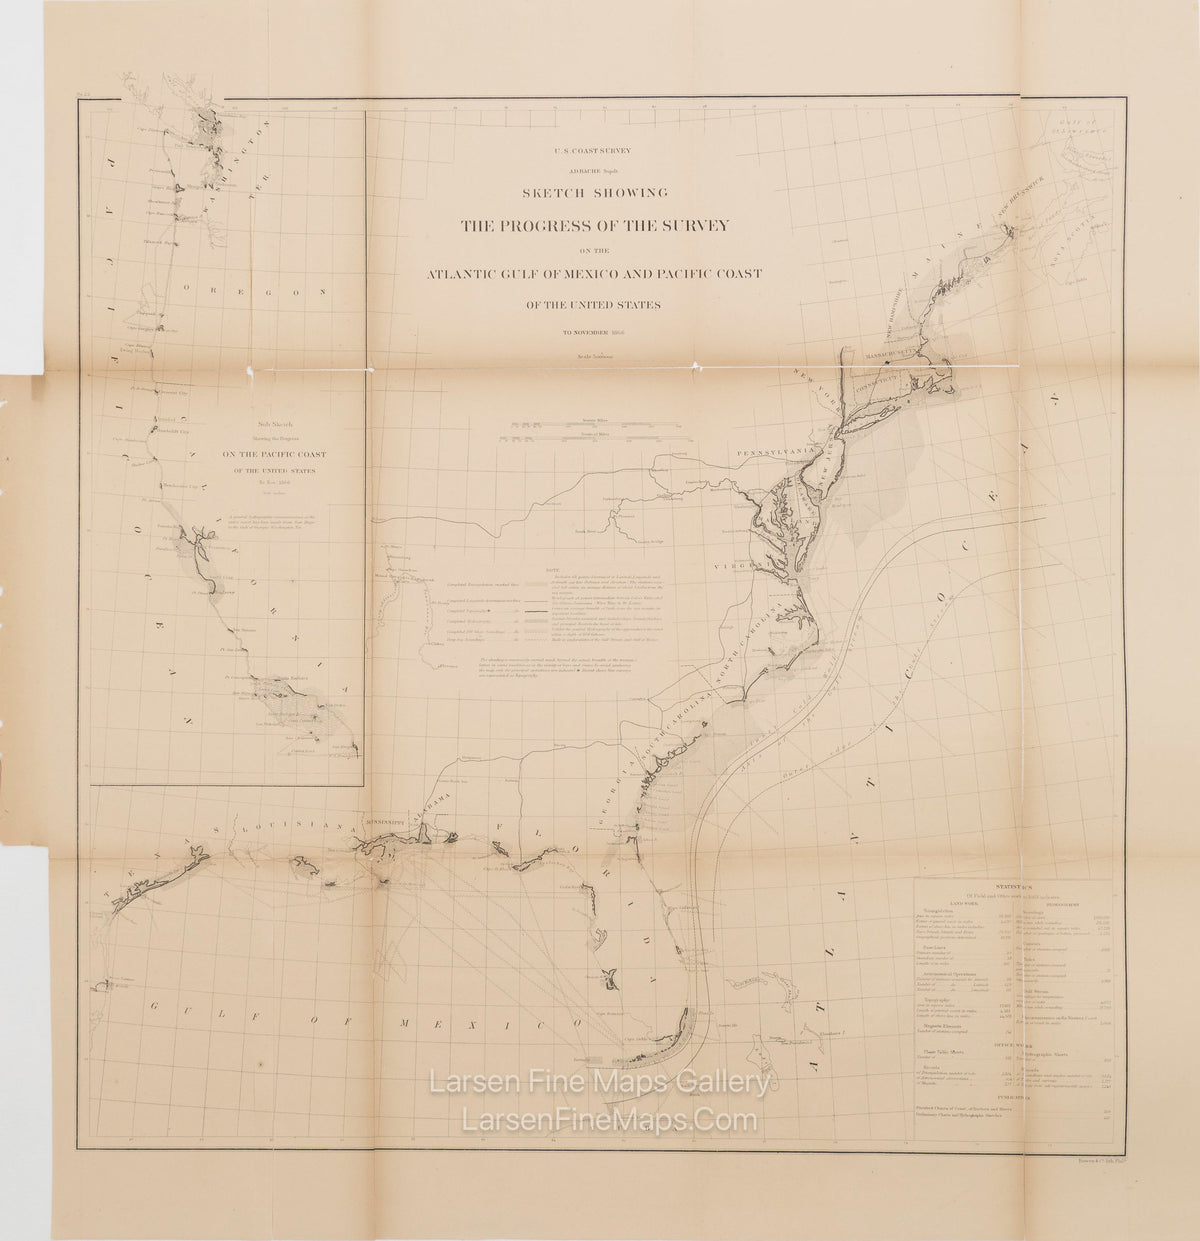 Sketch Showing The Progress of The Survey on the Atlantic Gulf of Mexico and Pacific Coast of The United States to November 1866